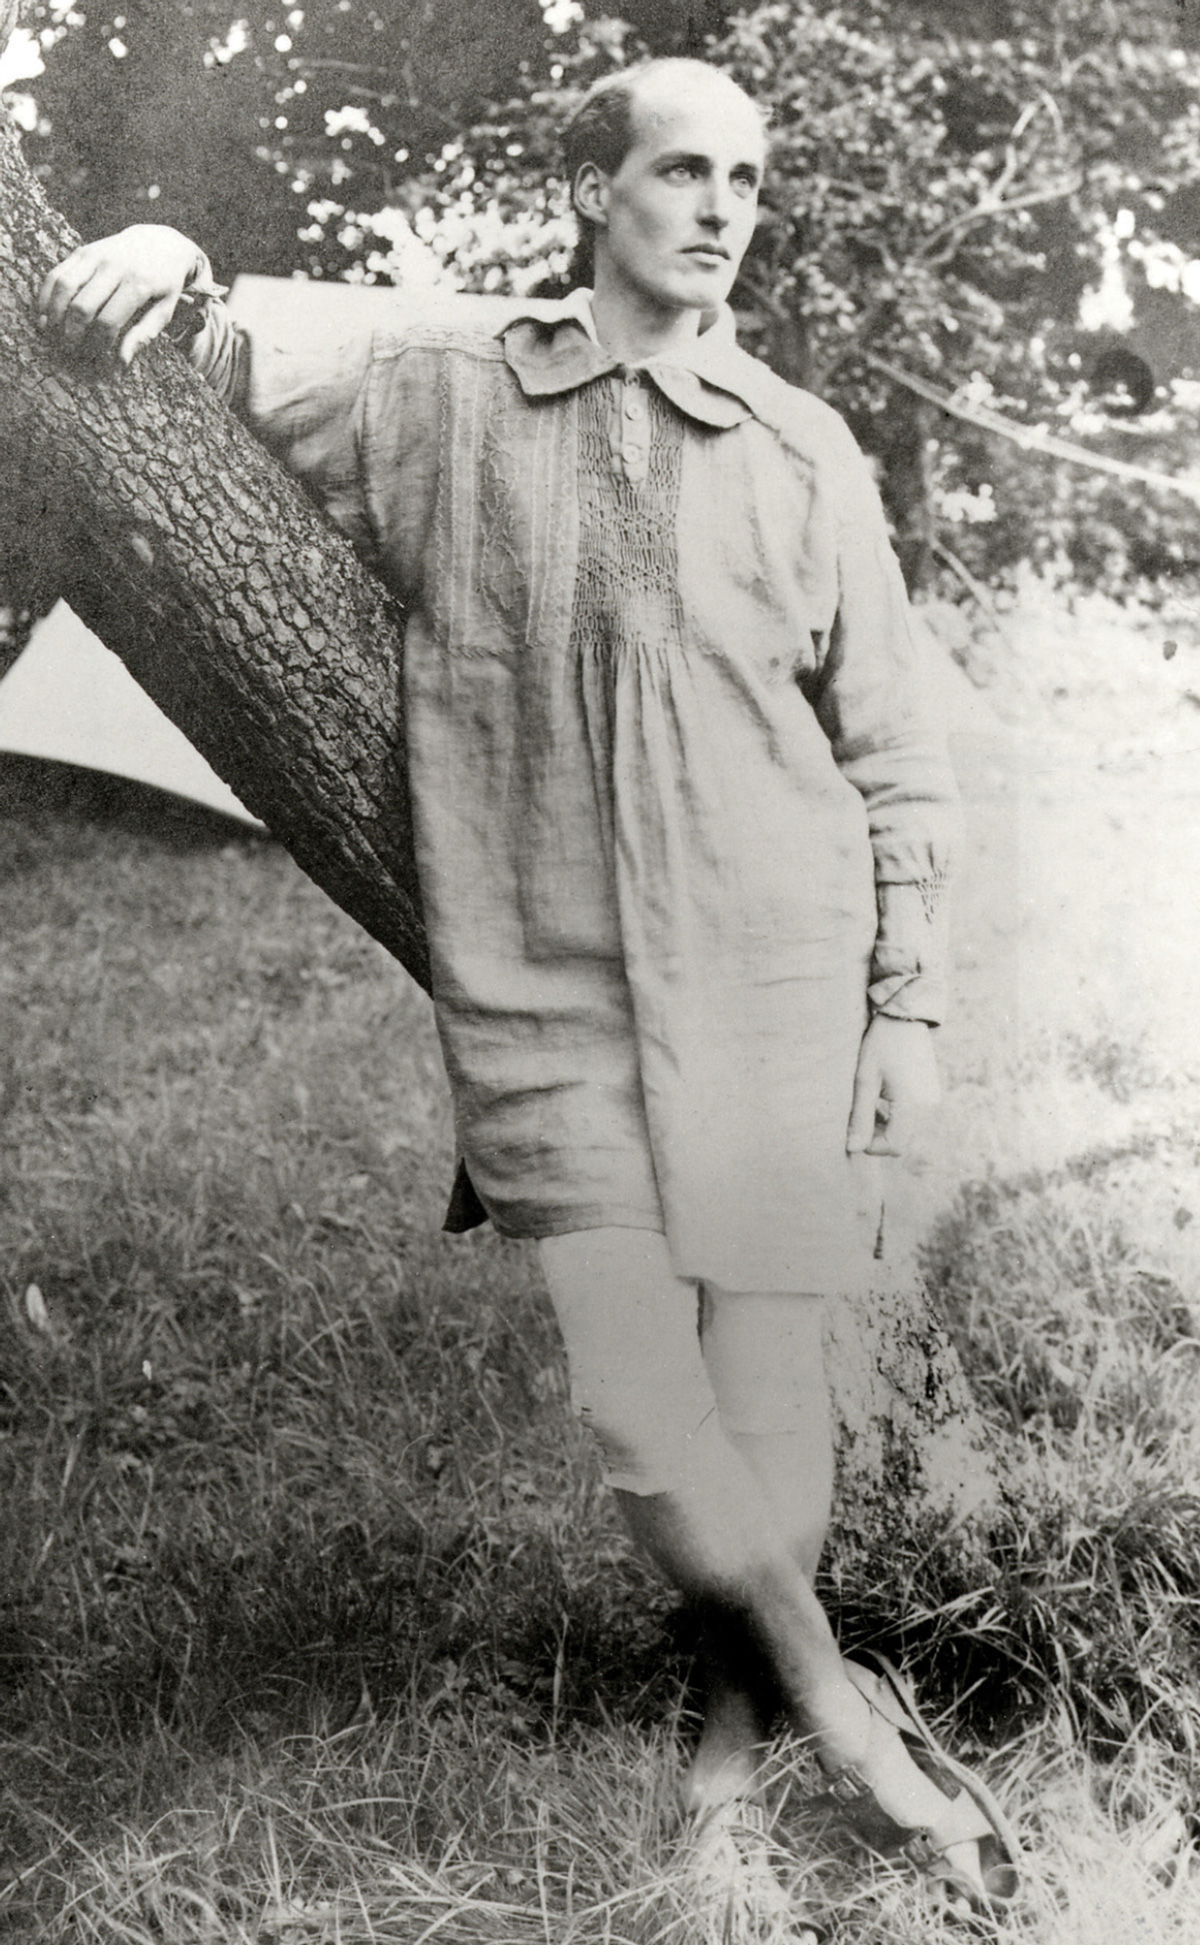 Andrew Muir, consultant architect to the Garden City, wearing what was referred to at the time as “rational dress.” Courtesy First Garden City Heritage Museum of the Letchworth Garden City Heritage Foundation.